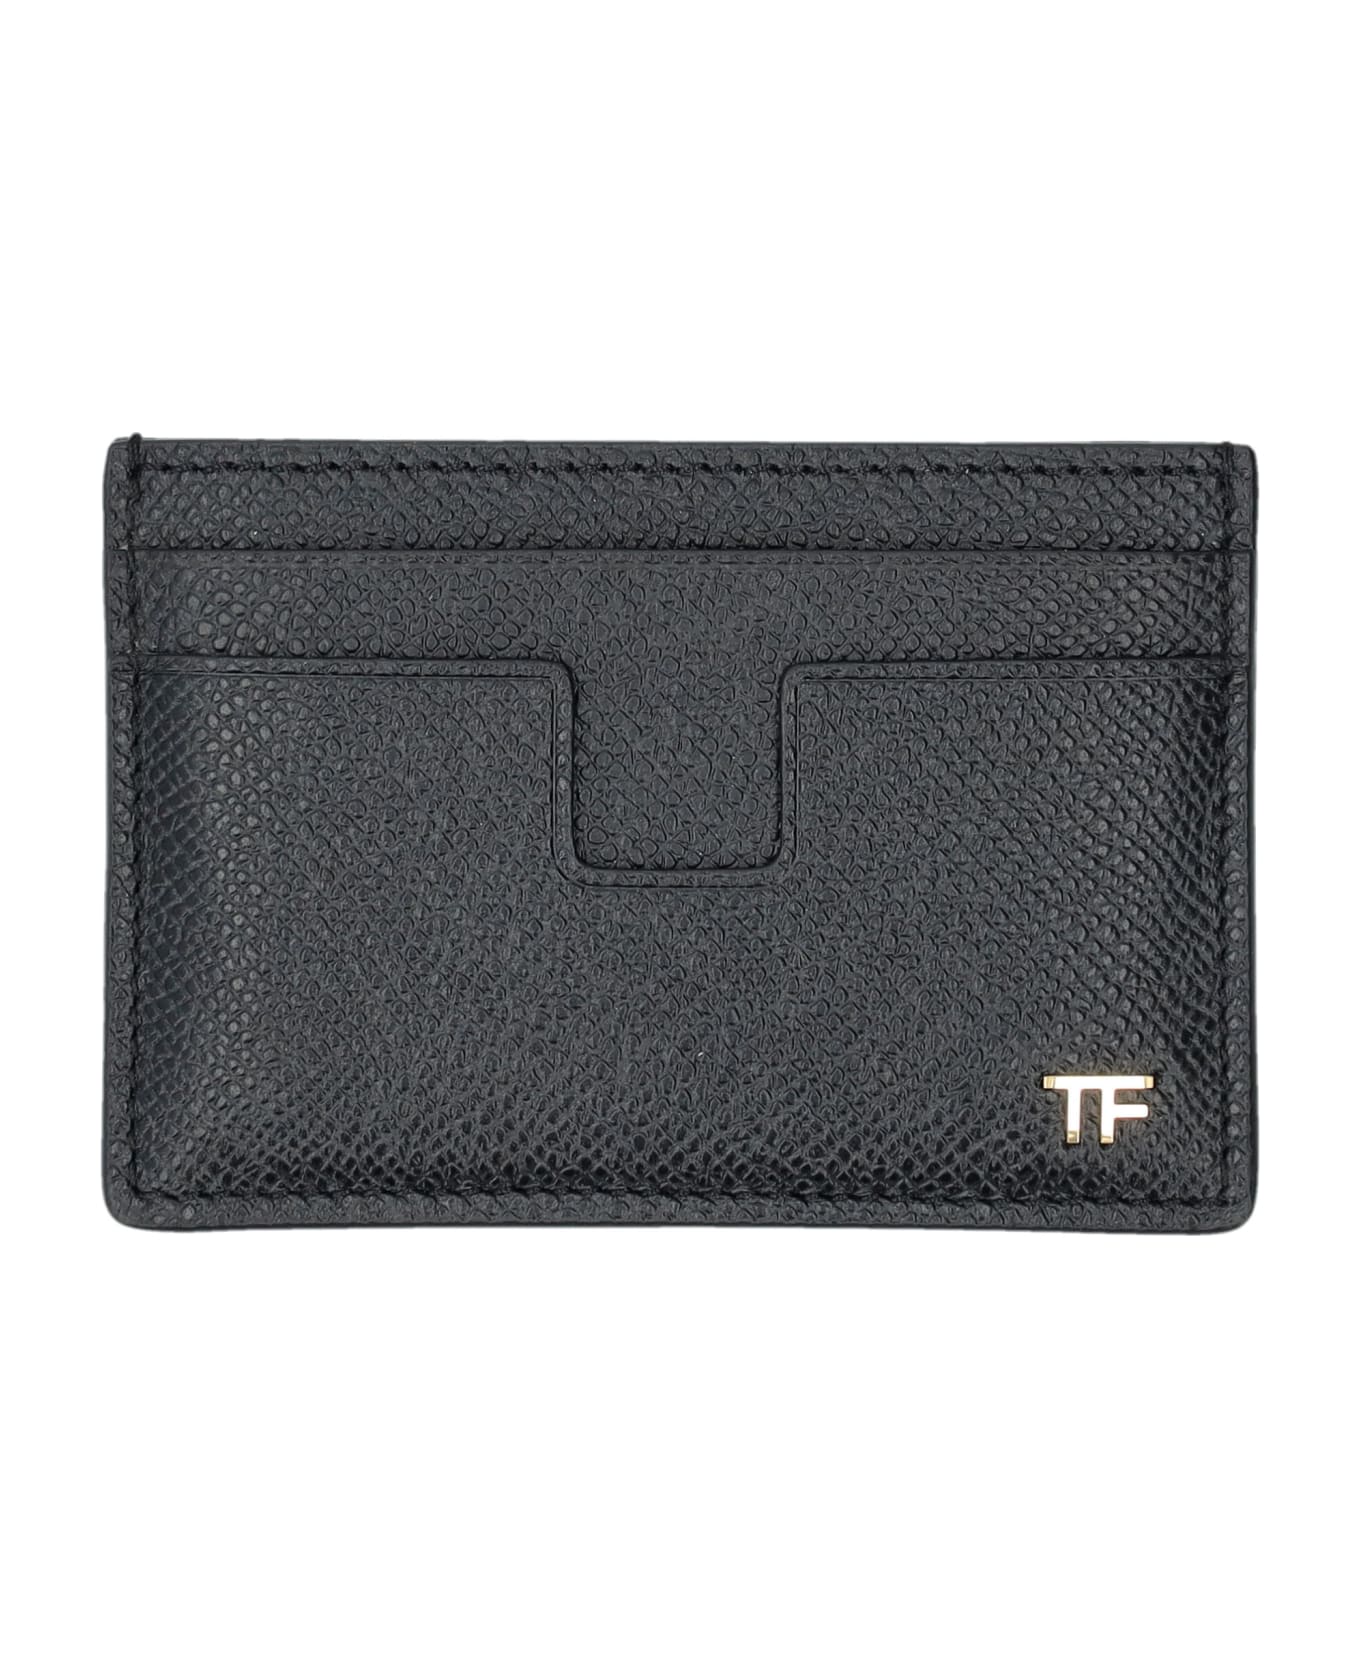 Tom Ford Small Grain Leather Cardholder - BLACK 財布